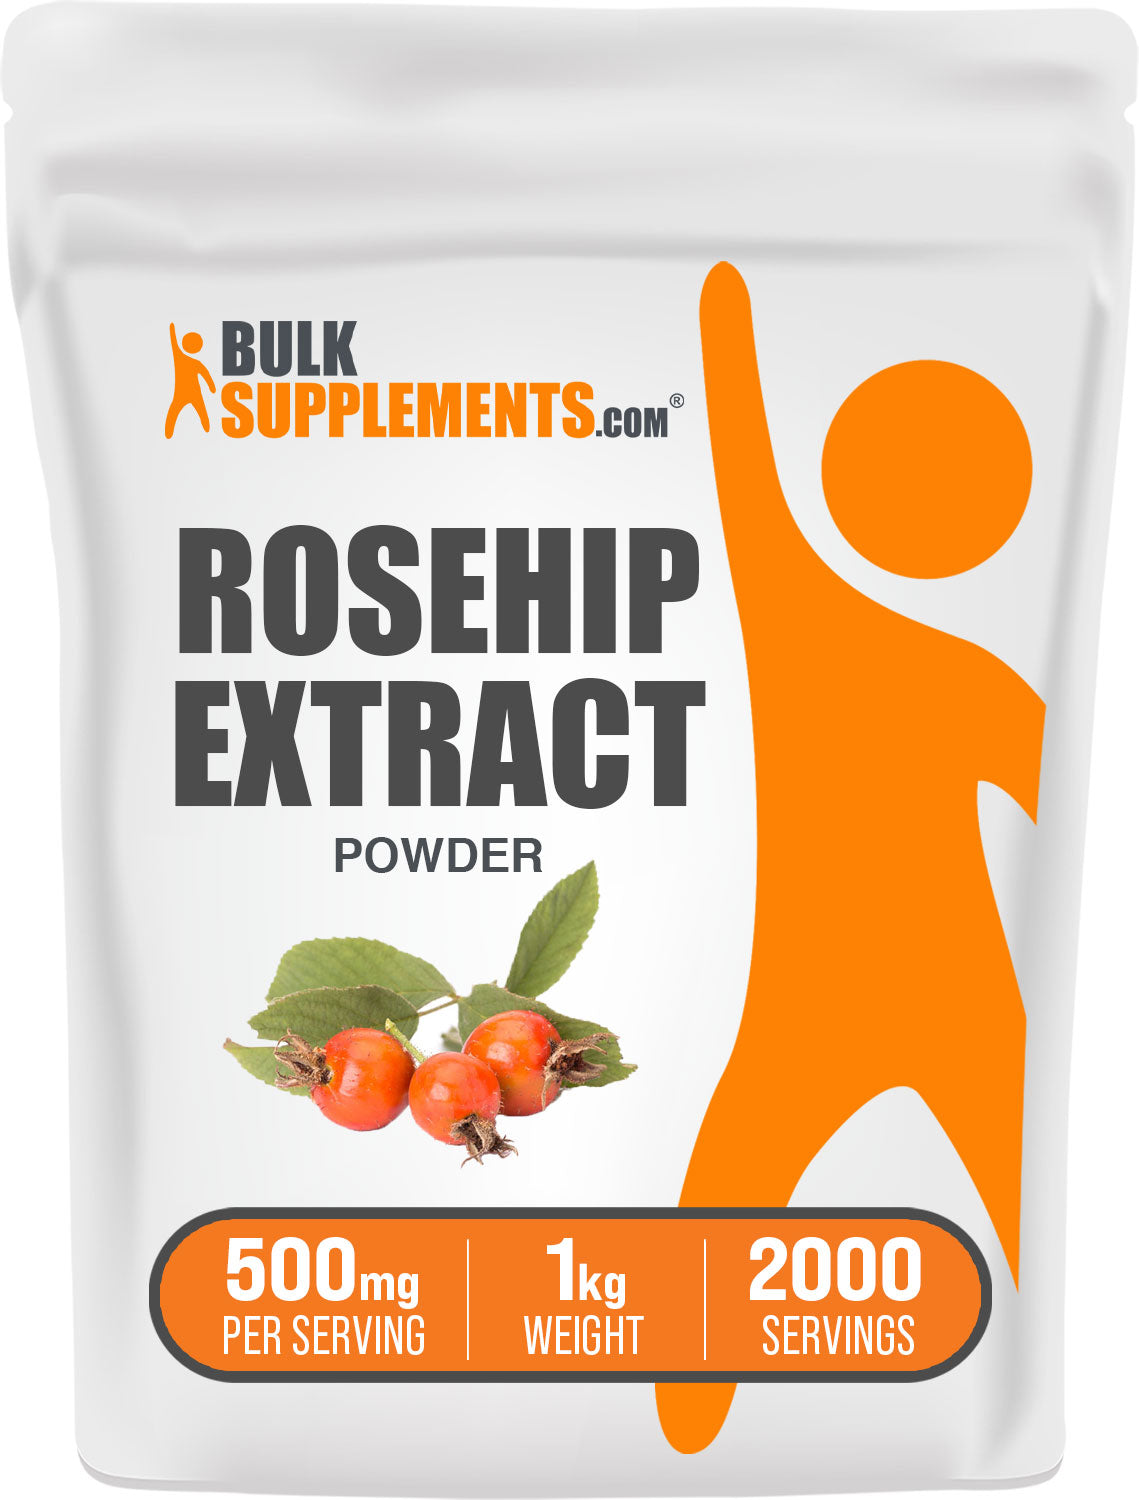 Rosehip Extract 1kg Bag